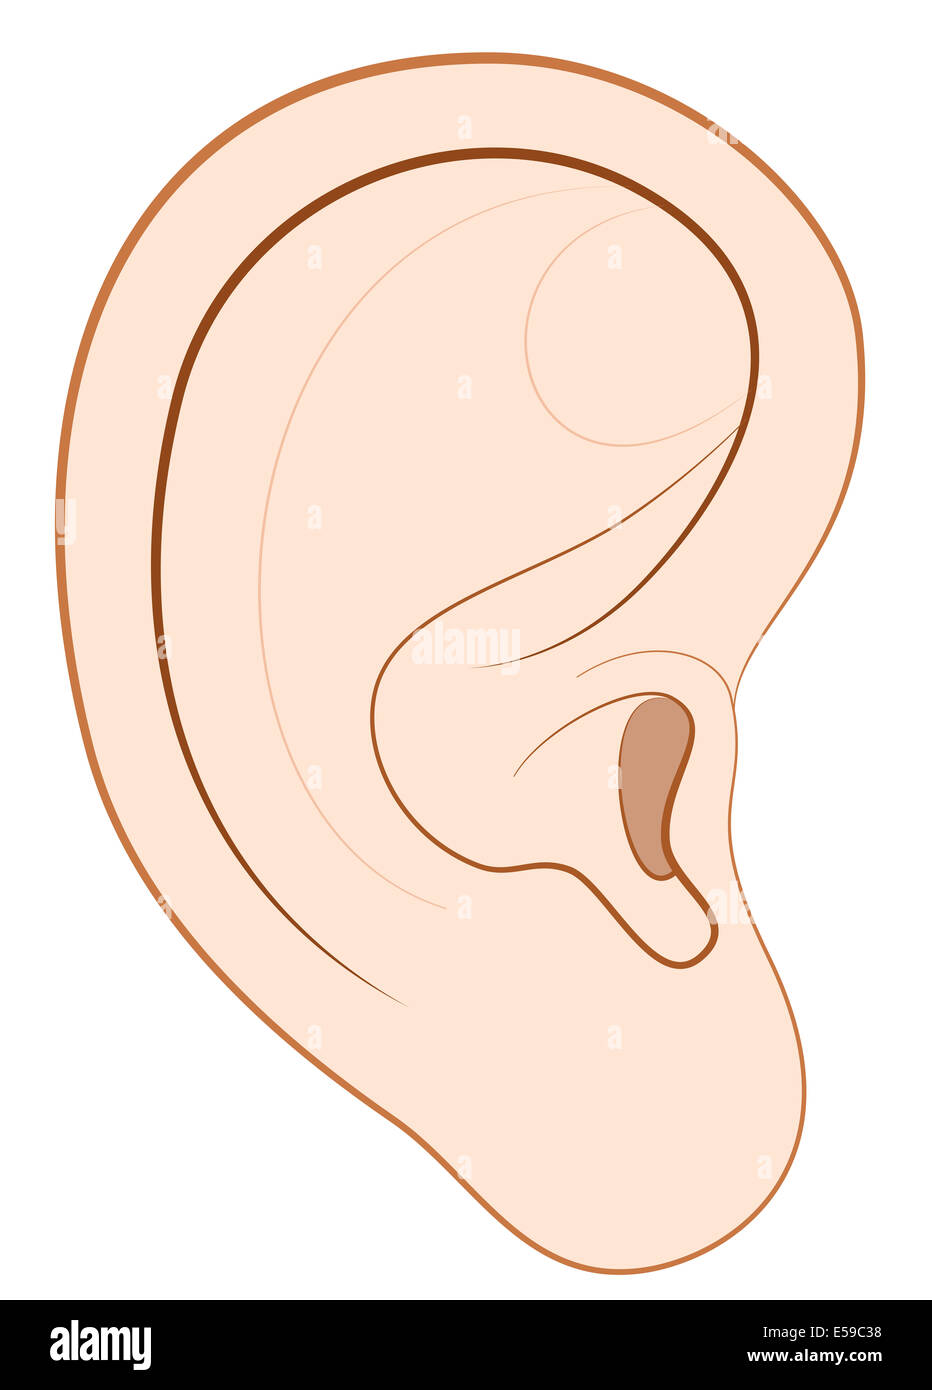 Illustration of a human right ear. Stock Photo